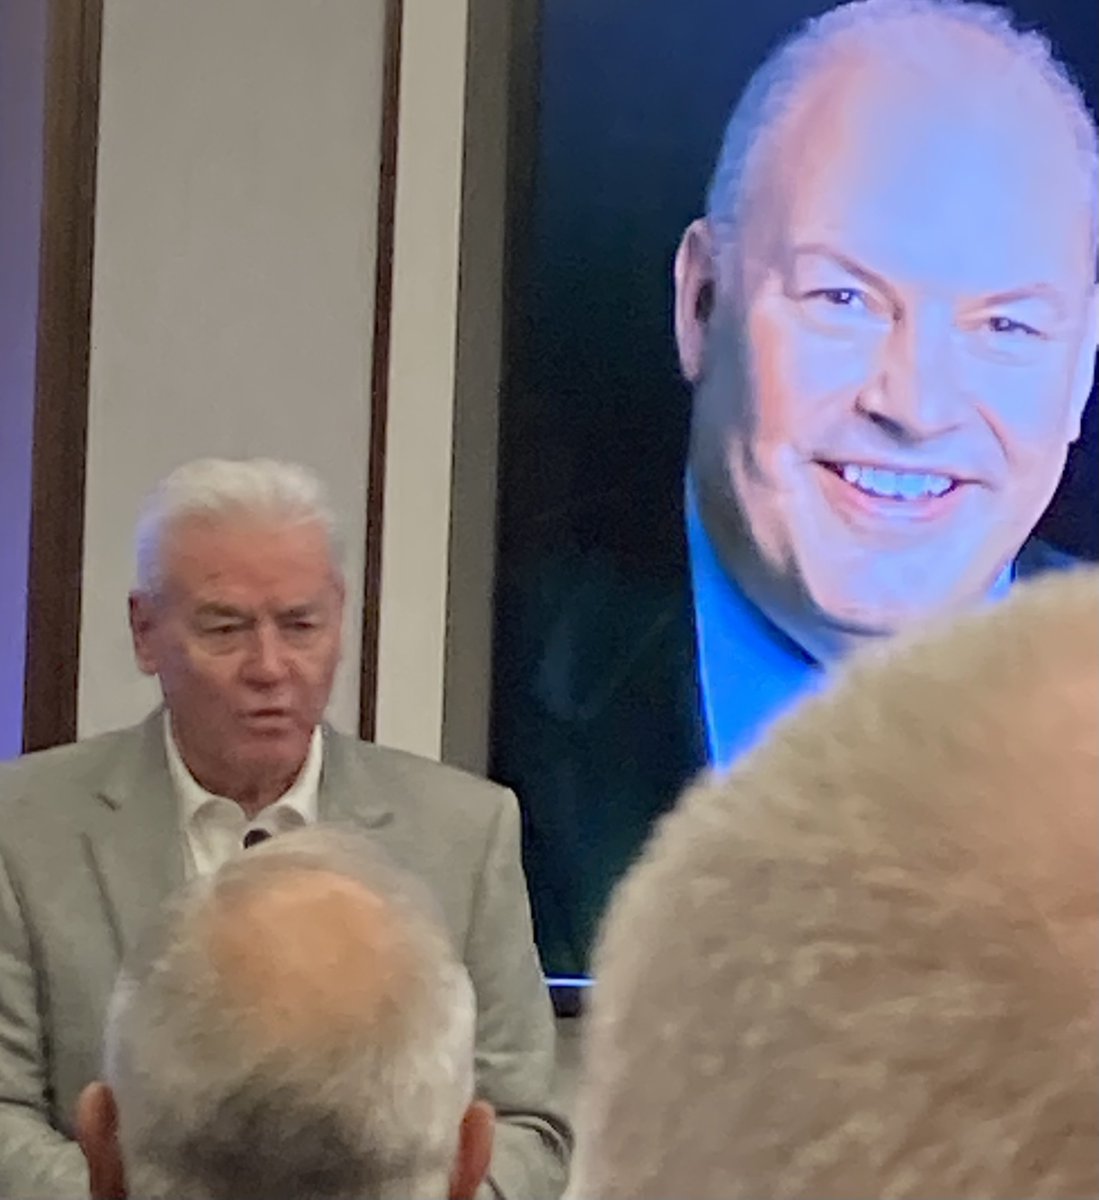 The @LIUNA’s General President Emeritus and our Chairman of the Board Terry O’Sullivan at Sunday’s Celebration of Life for the late Ullico CEO Edward M. Smith: “Eddie was a working class warrior … one of the finest human beings I have ever met in my life.” #UnionStrong